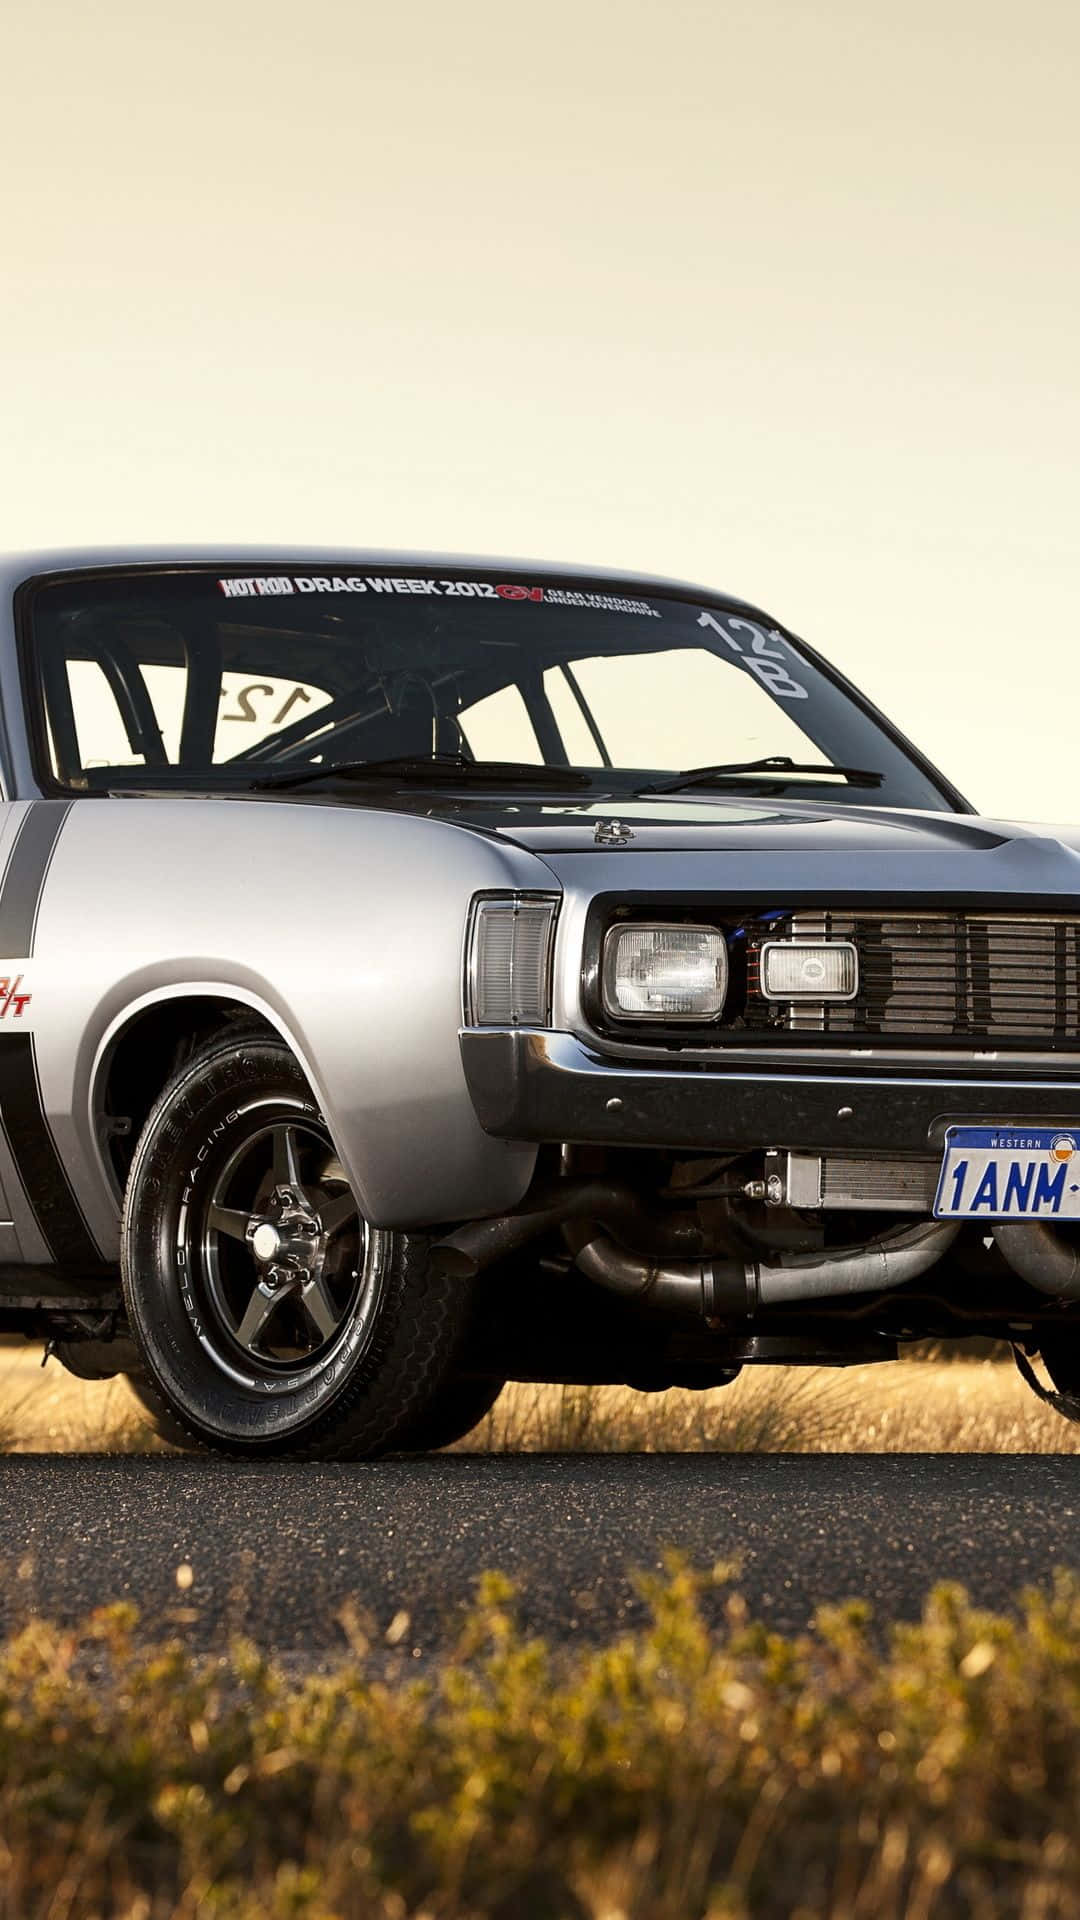 Classic Chrysler Valiant Charger Car Iphone Wallpaper